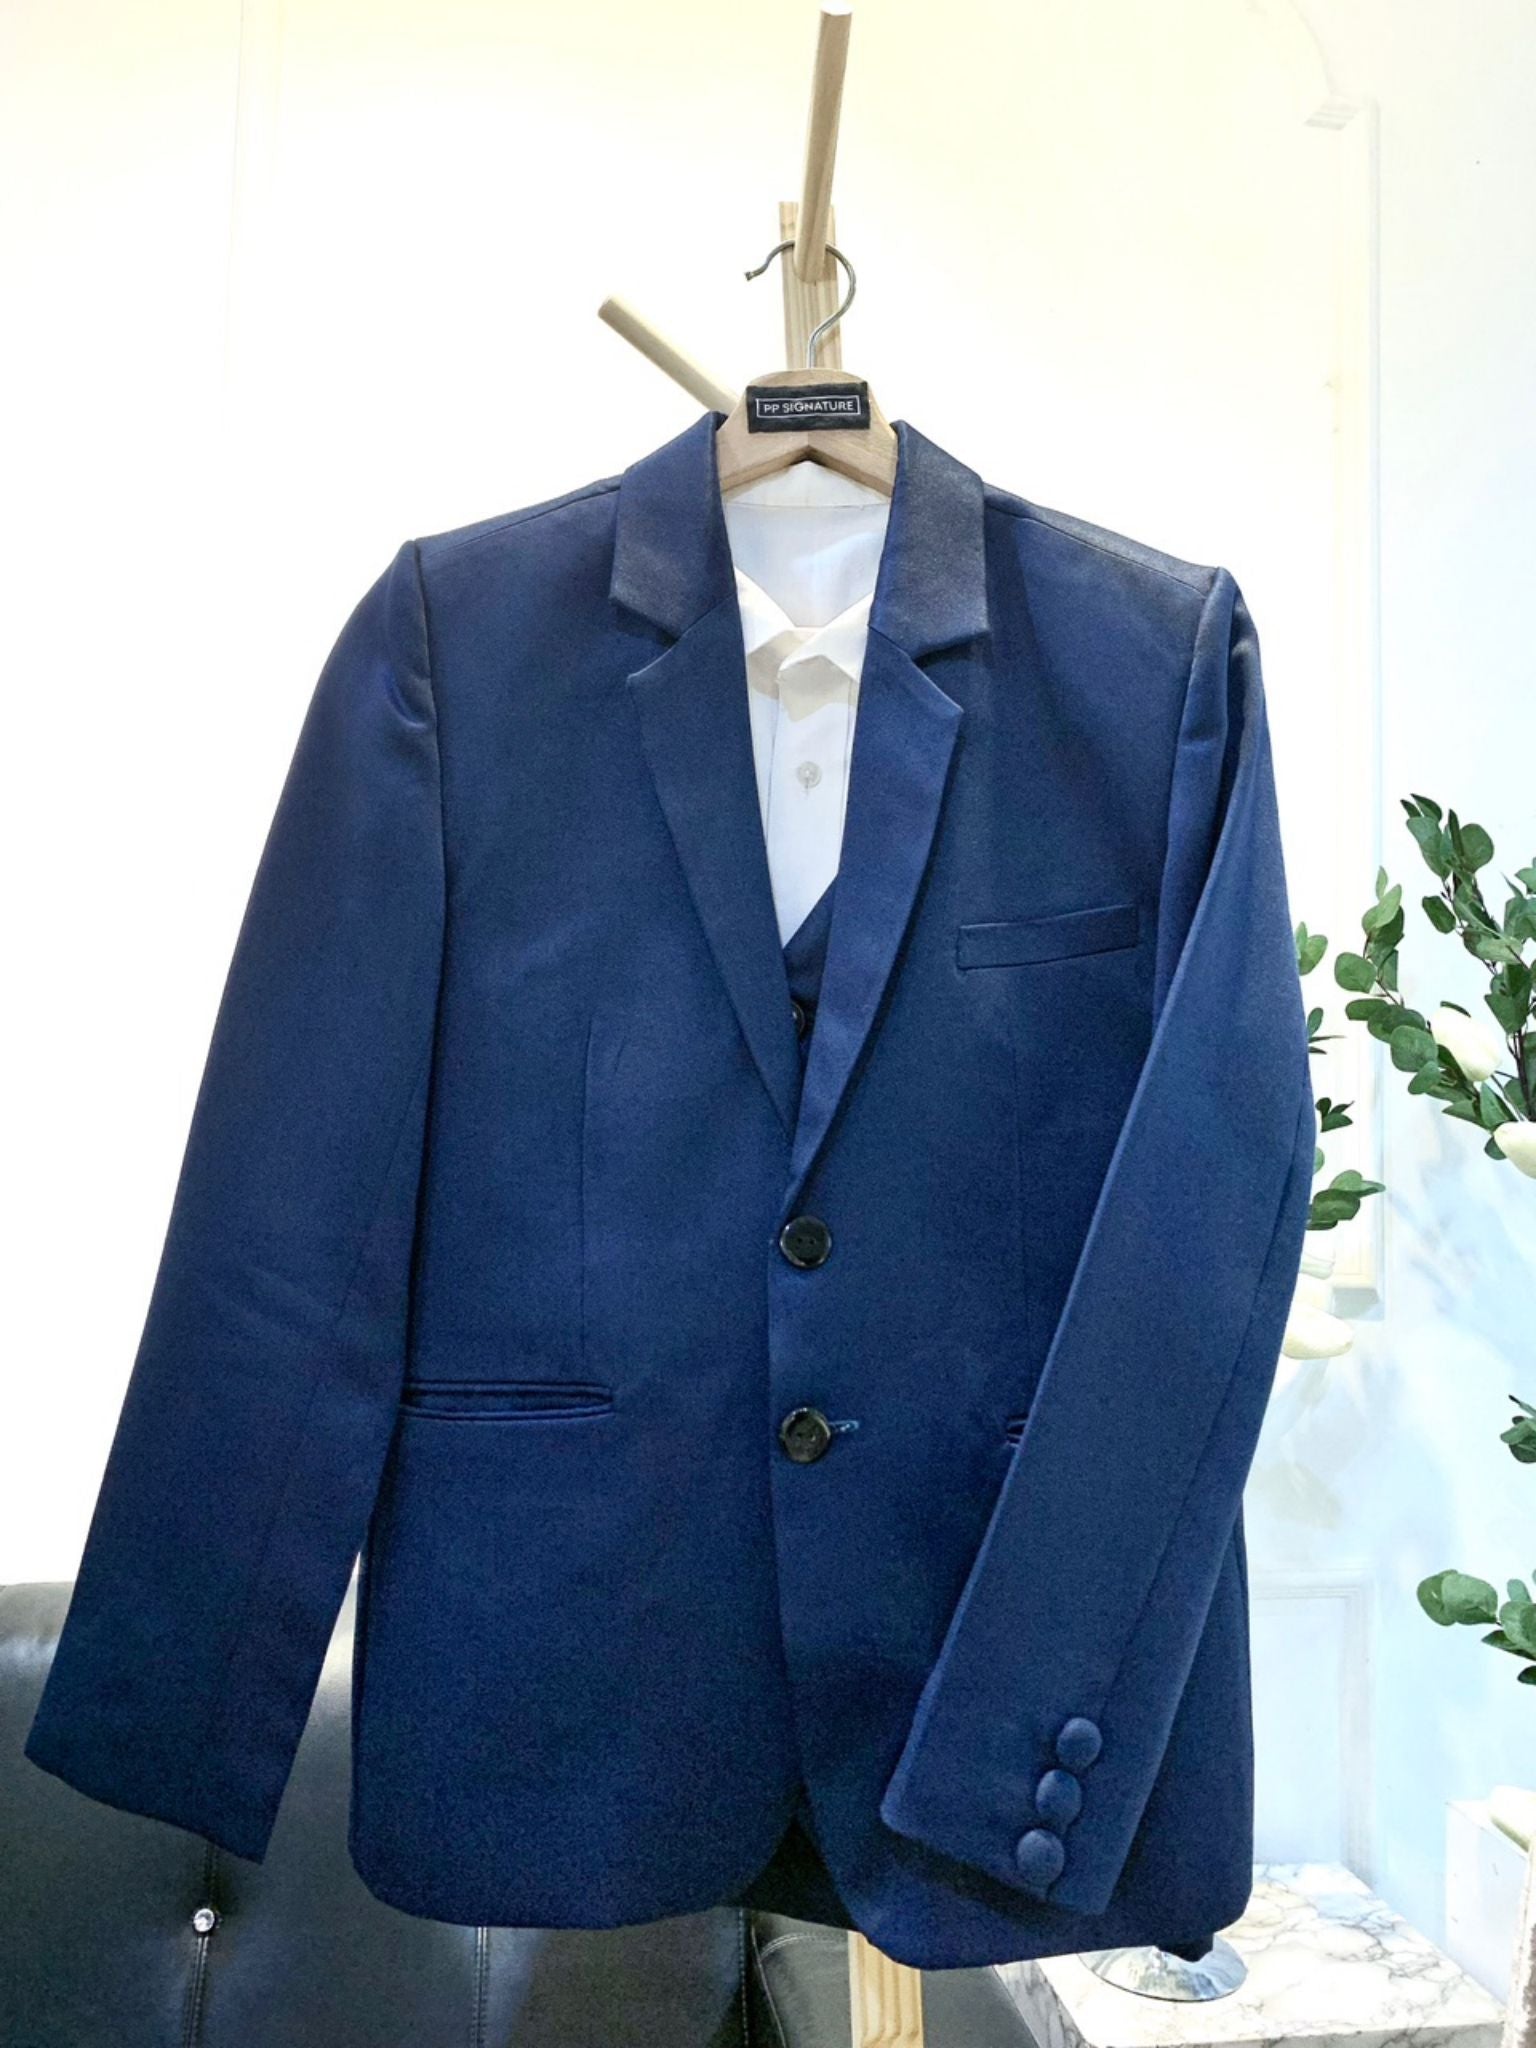 Blue suit jacket hanging on a wooden hanger. The jacket is made of a light blue fabric and has a single-breasted design with a notch lapel. It is suitable for formal occasions, such as weddings or job interviews.